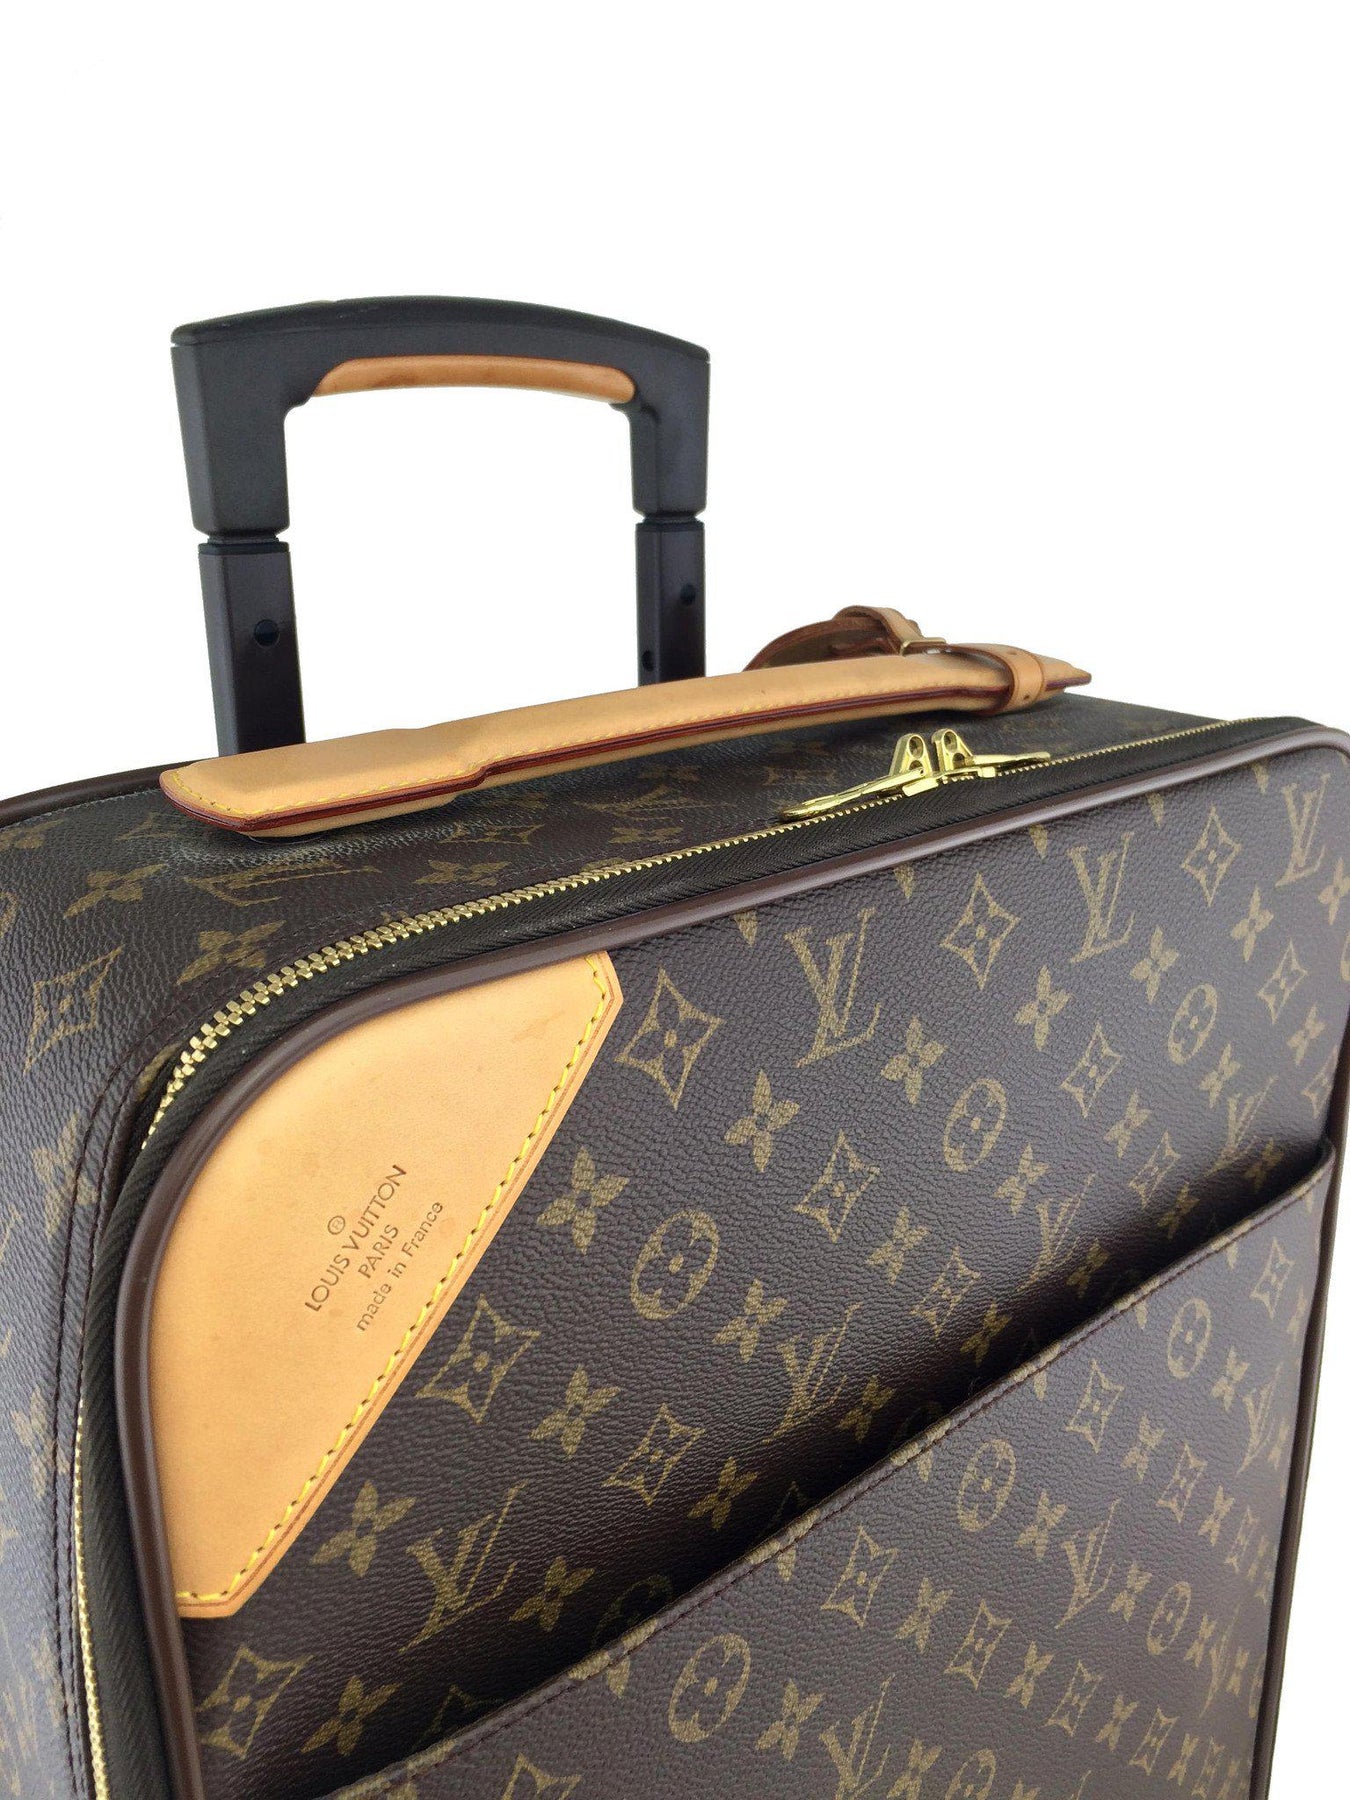 Pegase 50 Monogram Business Roller Carry On - Luggage – Baggio Consignment